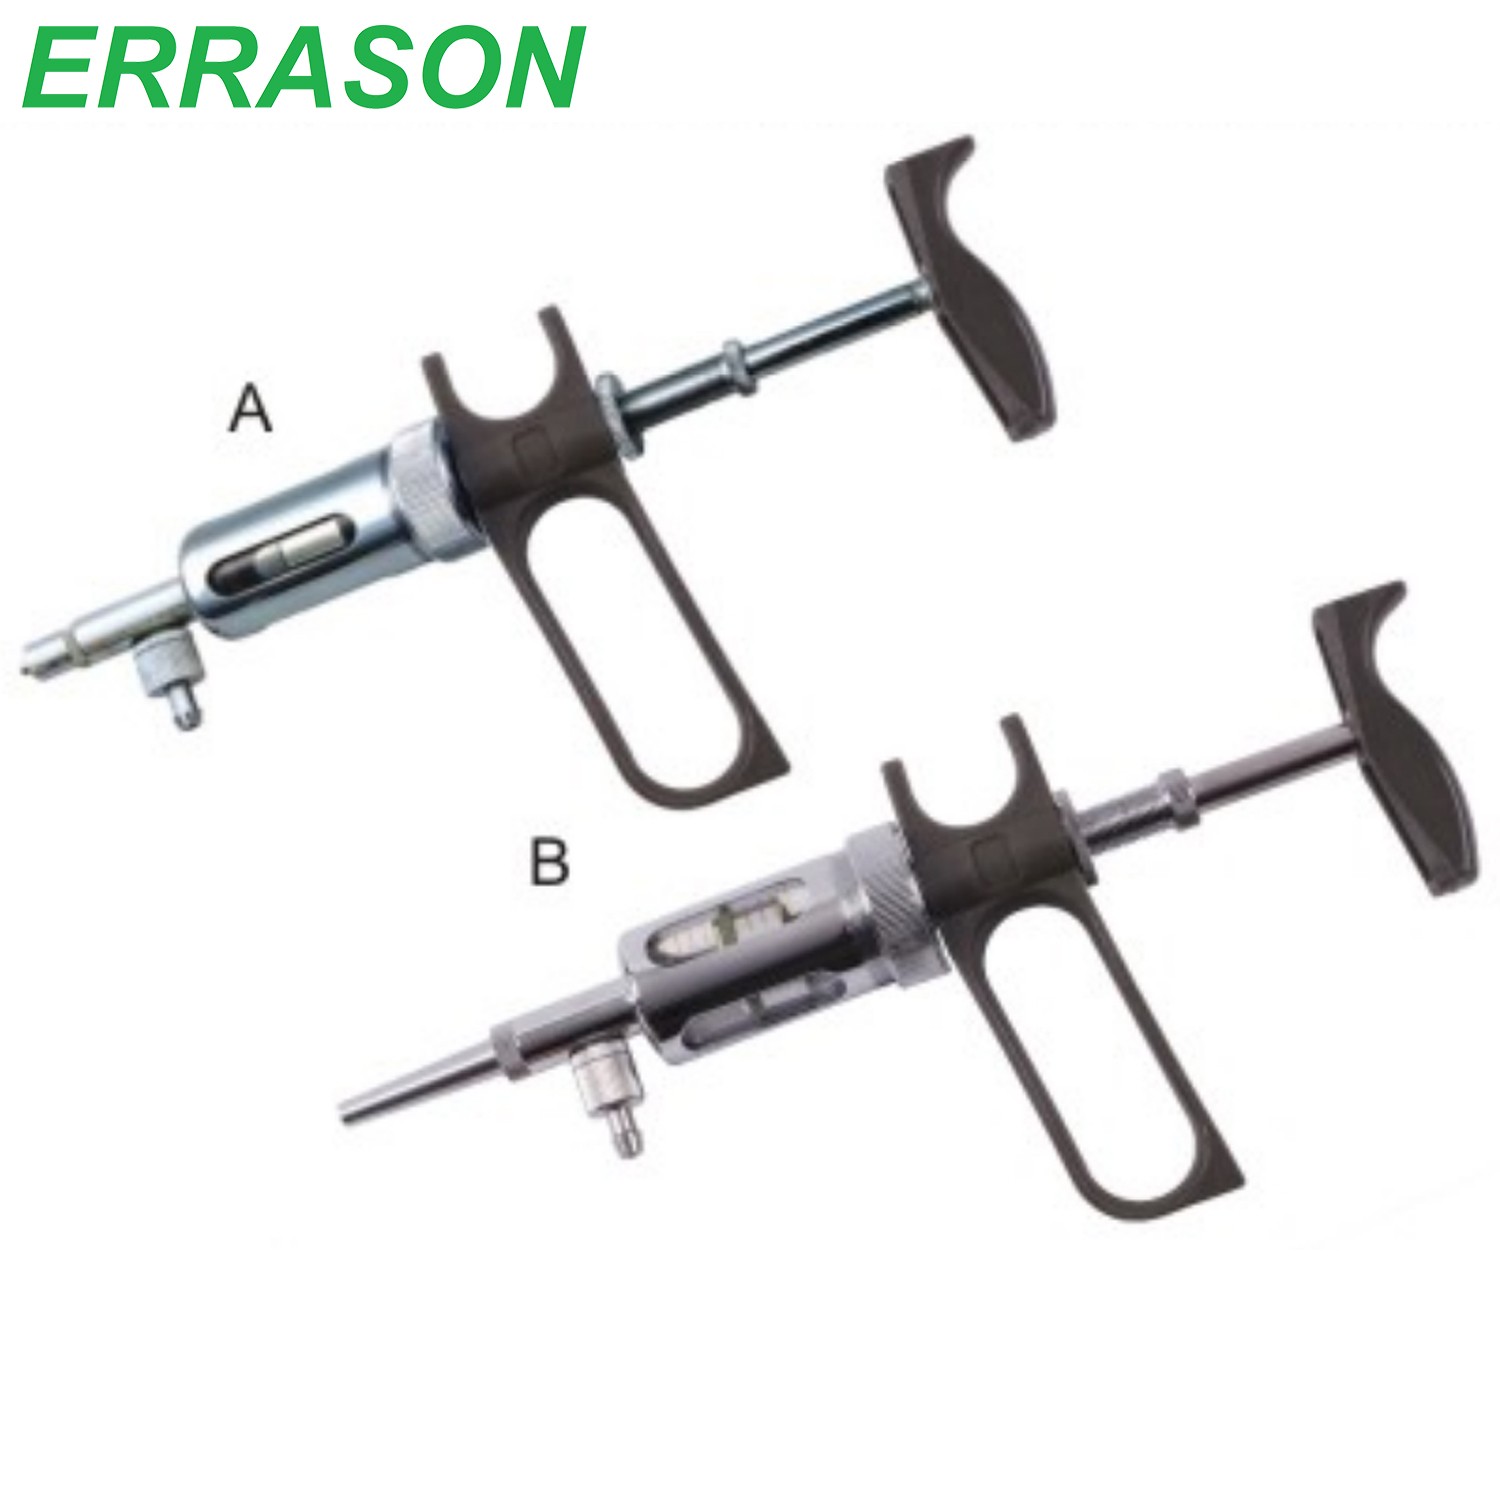 Continuous syringe A-type.B-type